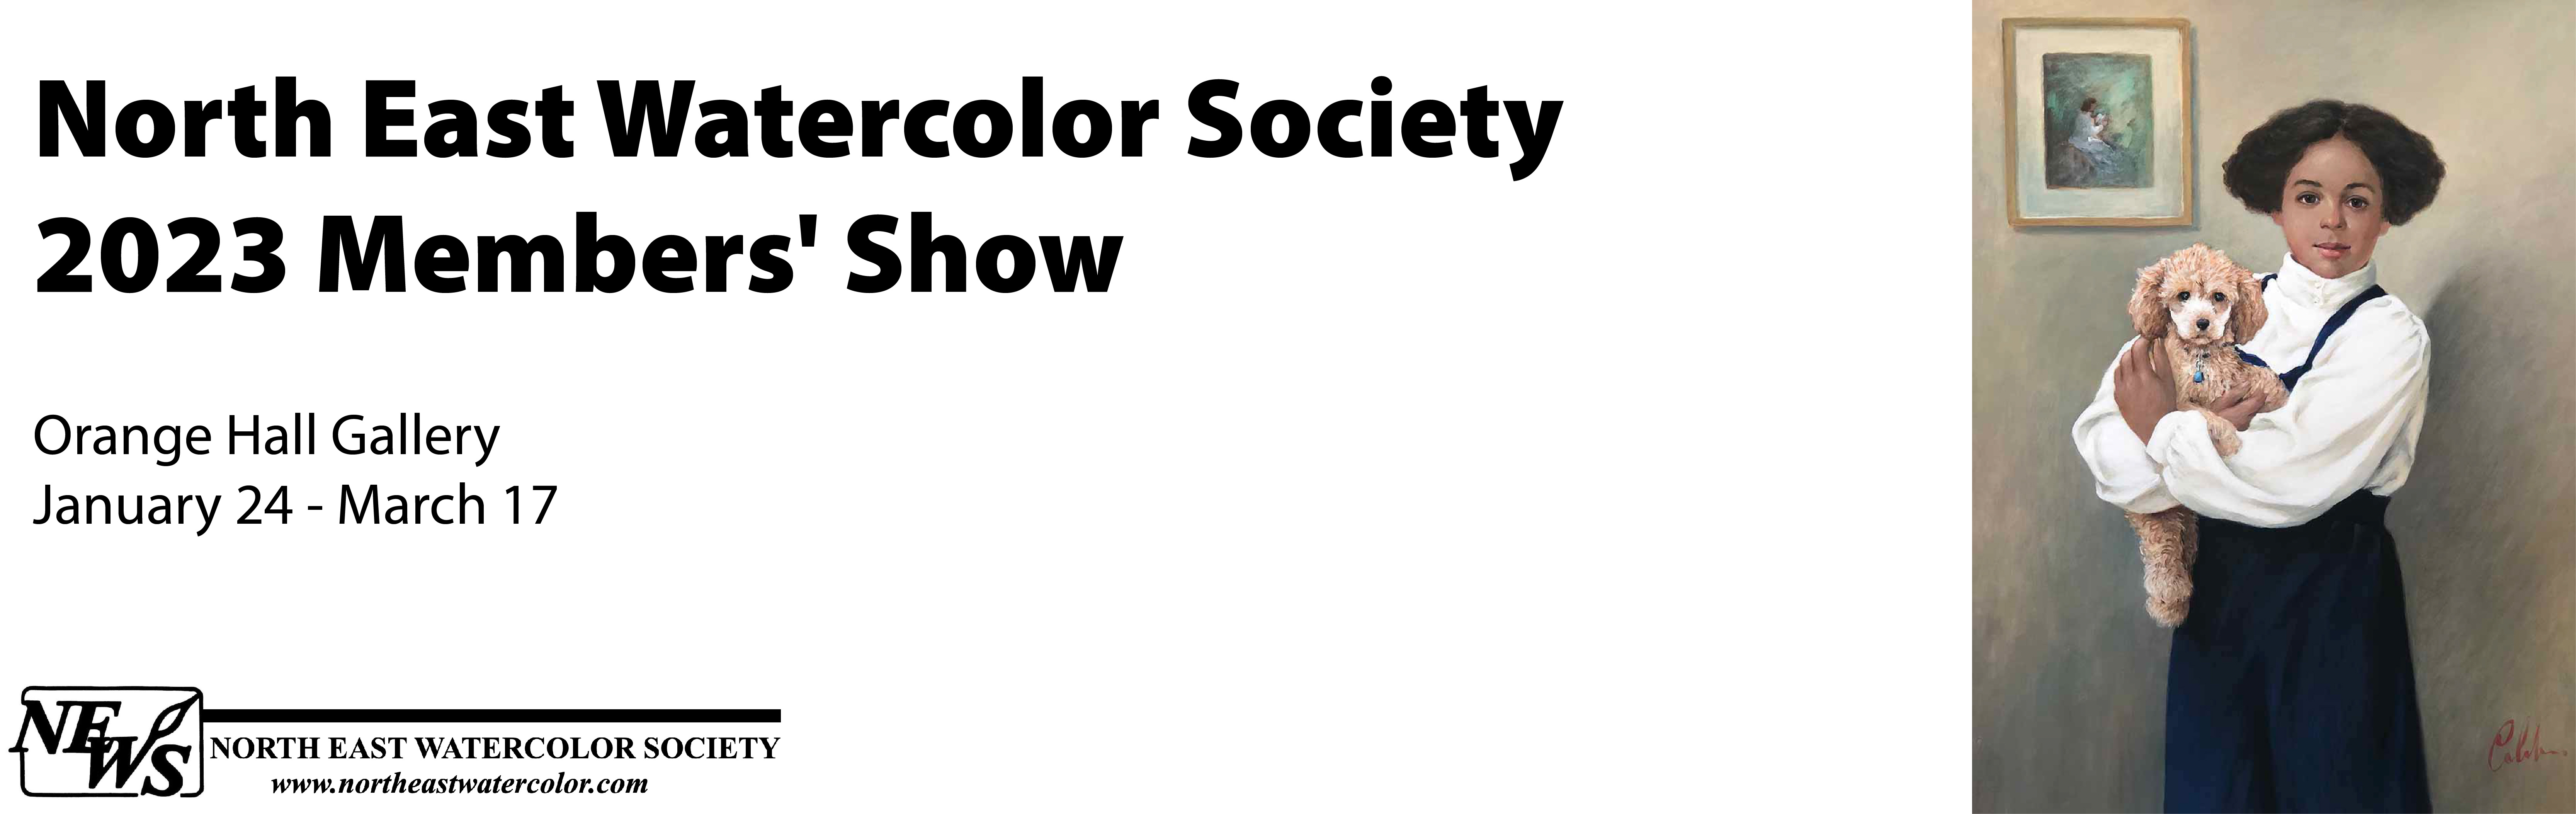 North East Watercolor Society  2023 Members' Show